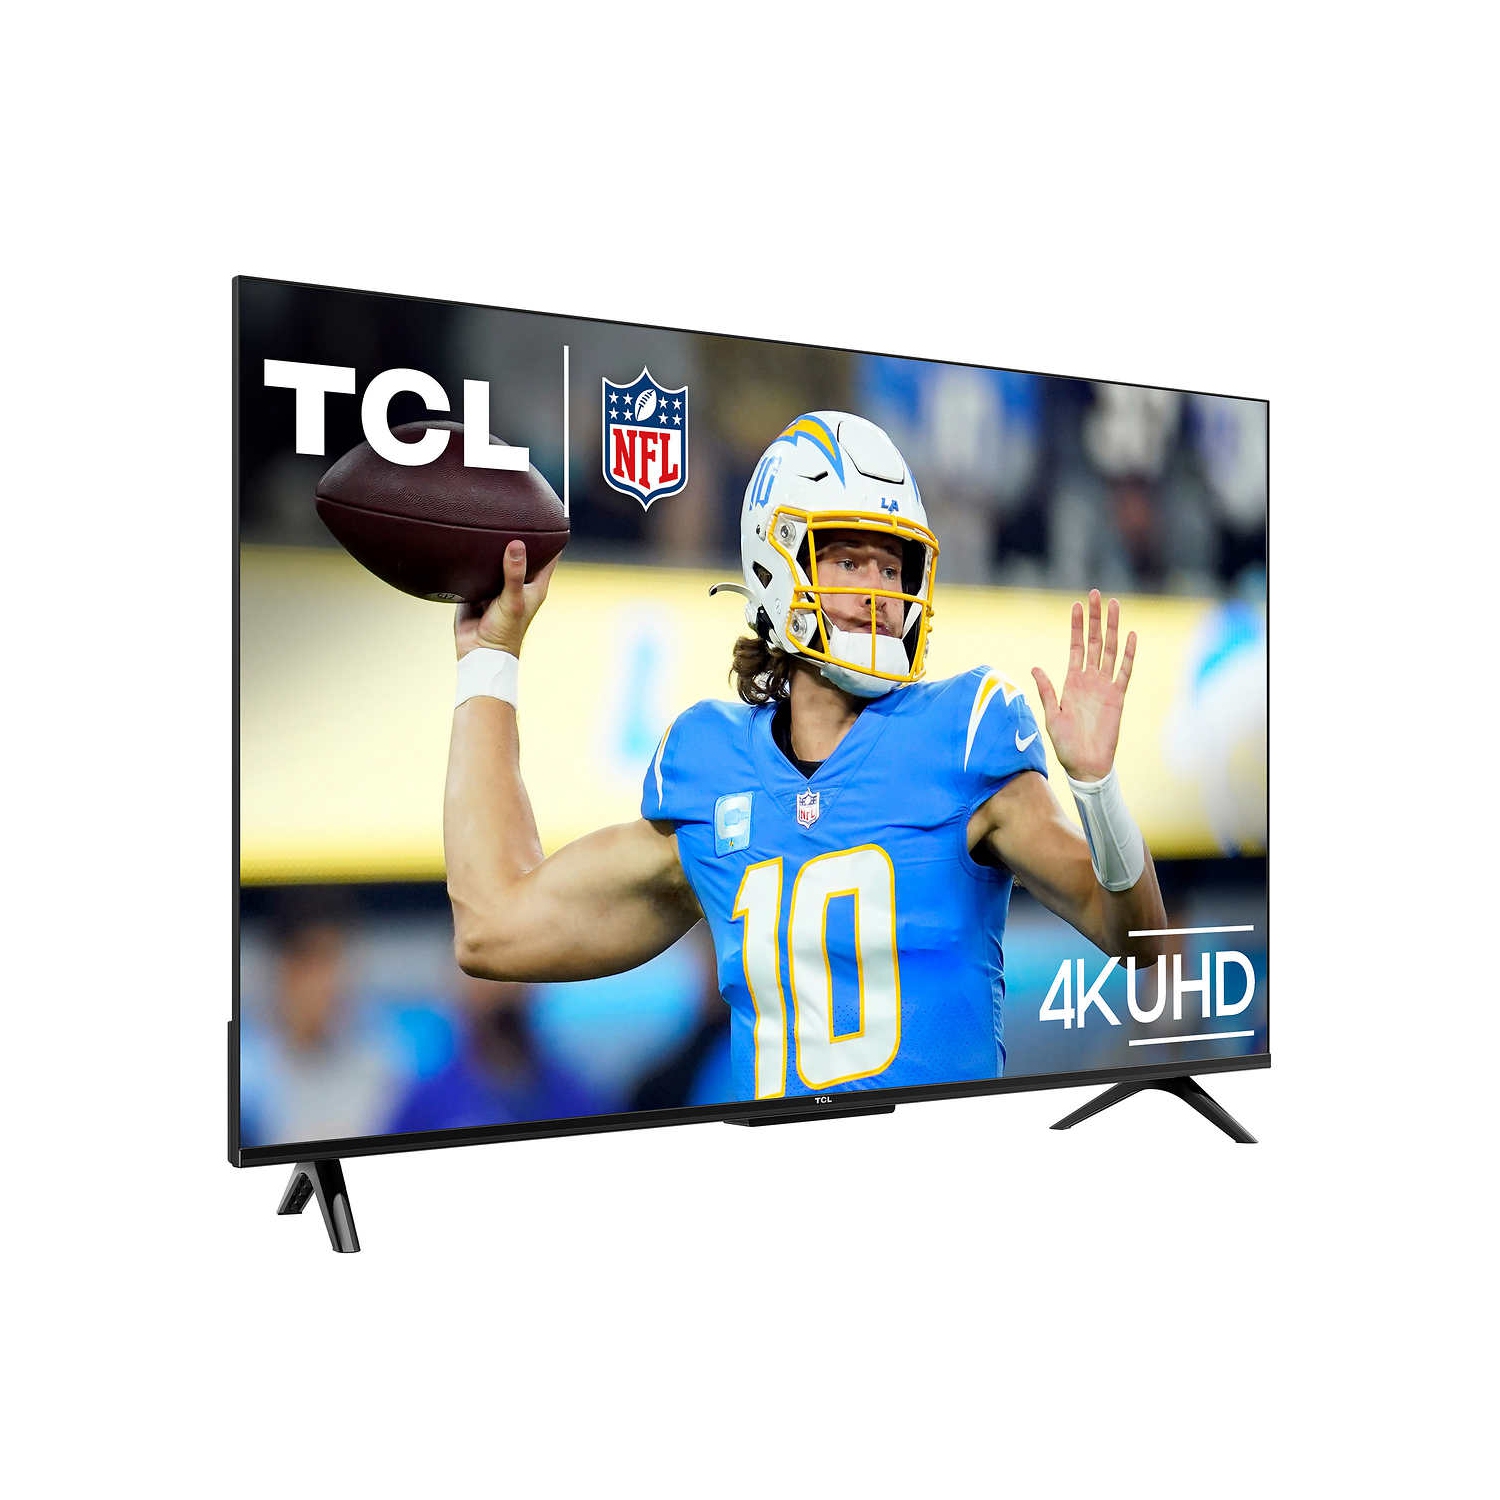 REFURBISHED(Good) - TCL 43" Class S Class 4K UHD HDR LED Smart TV with Google TV (43S470G)